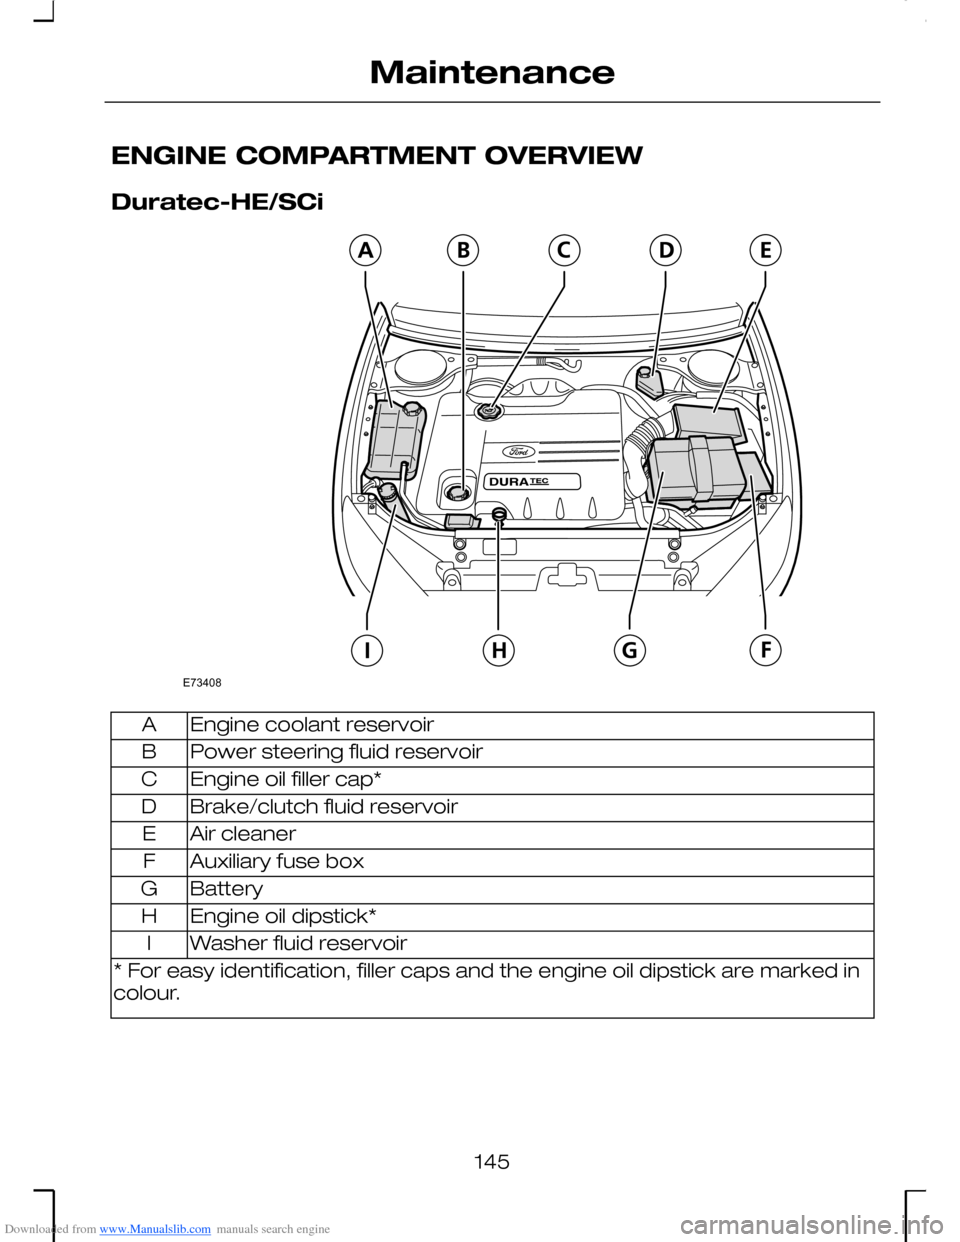 FORD MONDEO 2006 2.G Owners Manual Downloaded from www.Manualslib.com manuals search engine ENGINE COMPARTMENT OVERVIEW
Duratec-HE/SCi
Engine coolant reservoirA
Power steering fluid reservoirB
Engine oil filler cap*C
Brake/clutch fluid